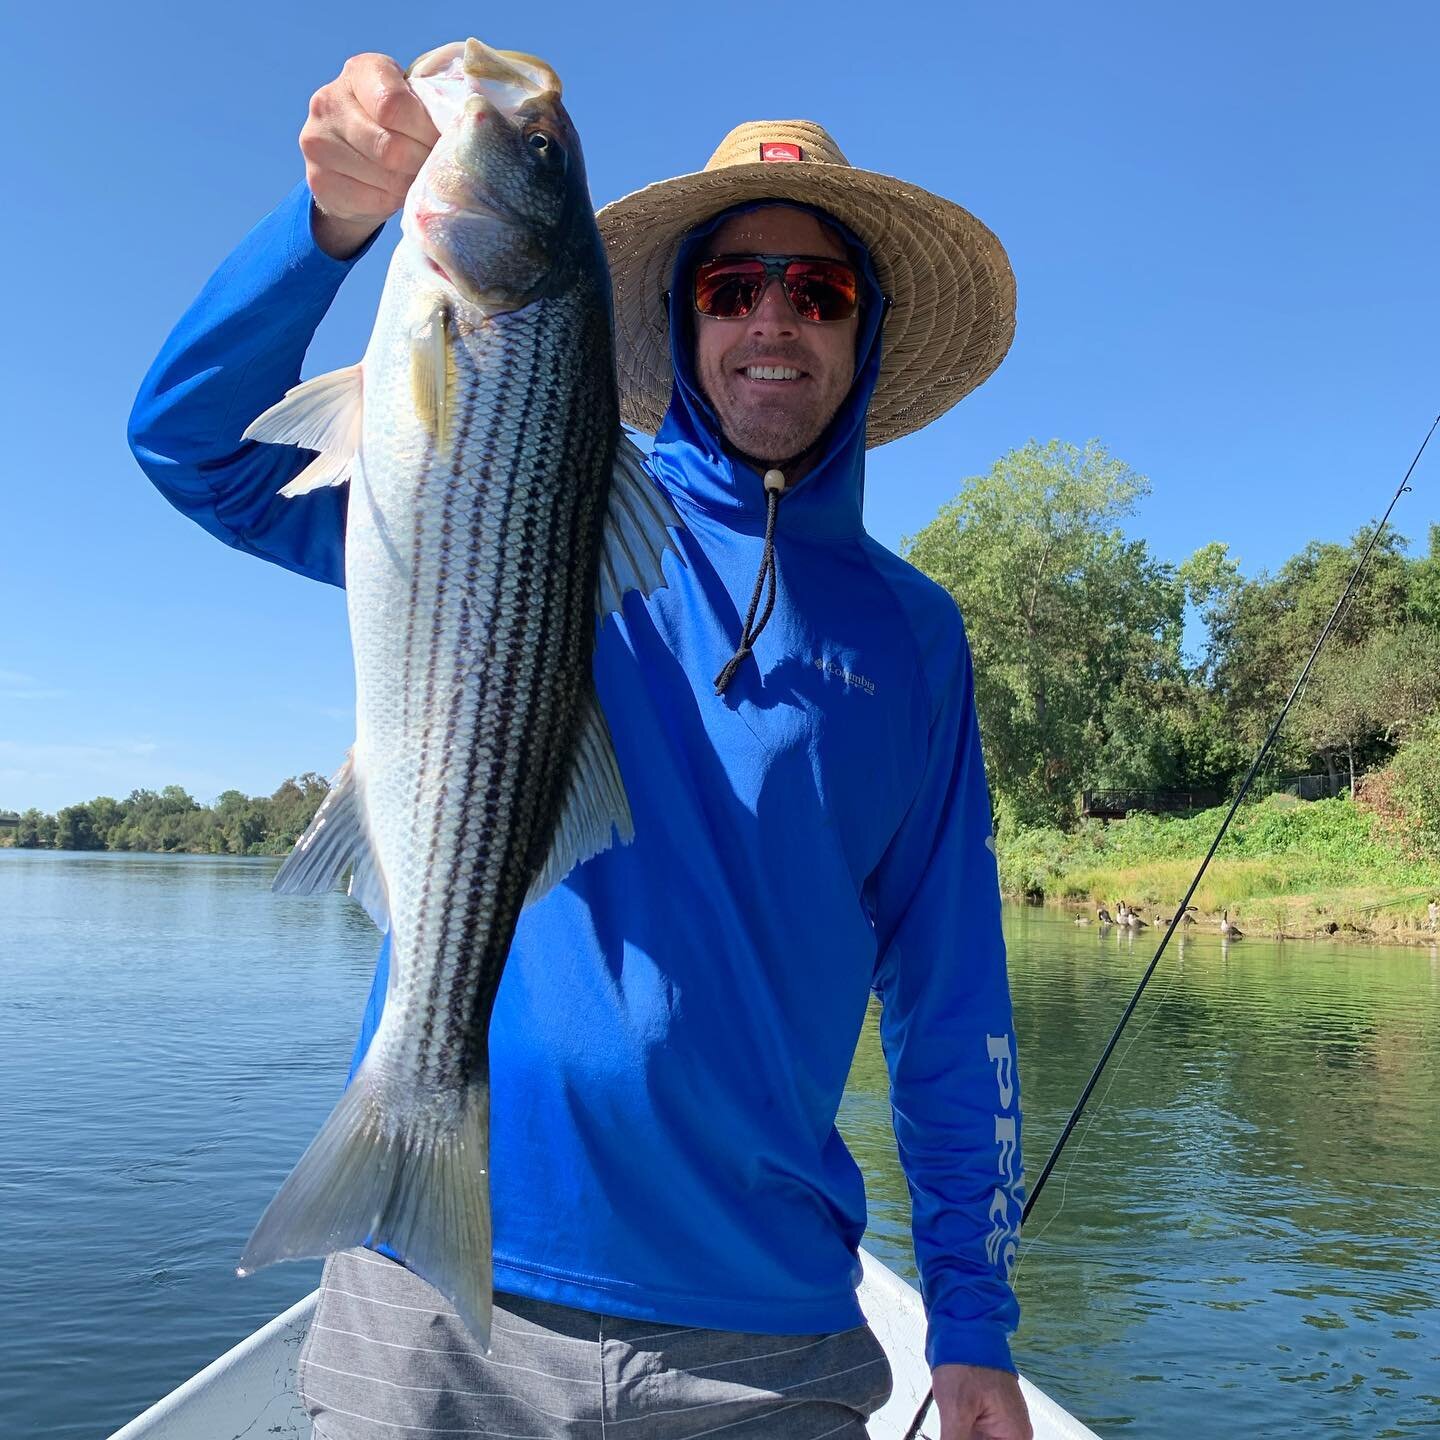 Great day fishing with Ryan and Chip. So much fun when it all comes together, and we found some solid fish yesterday Gotta love that 6 lb, 6 oz Striper fight!
&lsquo;
#fishing #fishcalifornia #stripedbass #thetugisthedrug #getoutside #fishinglife